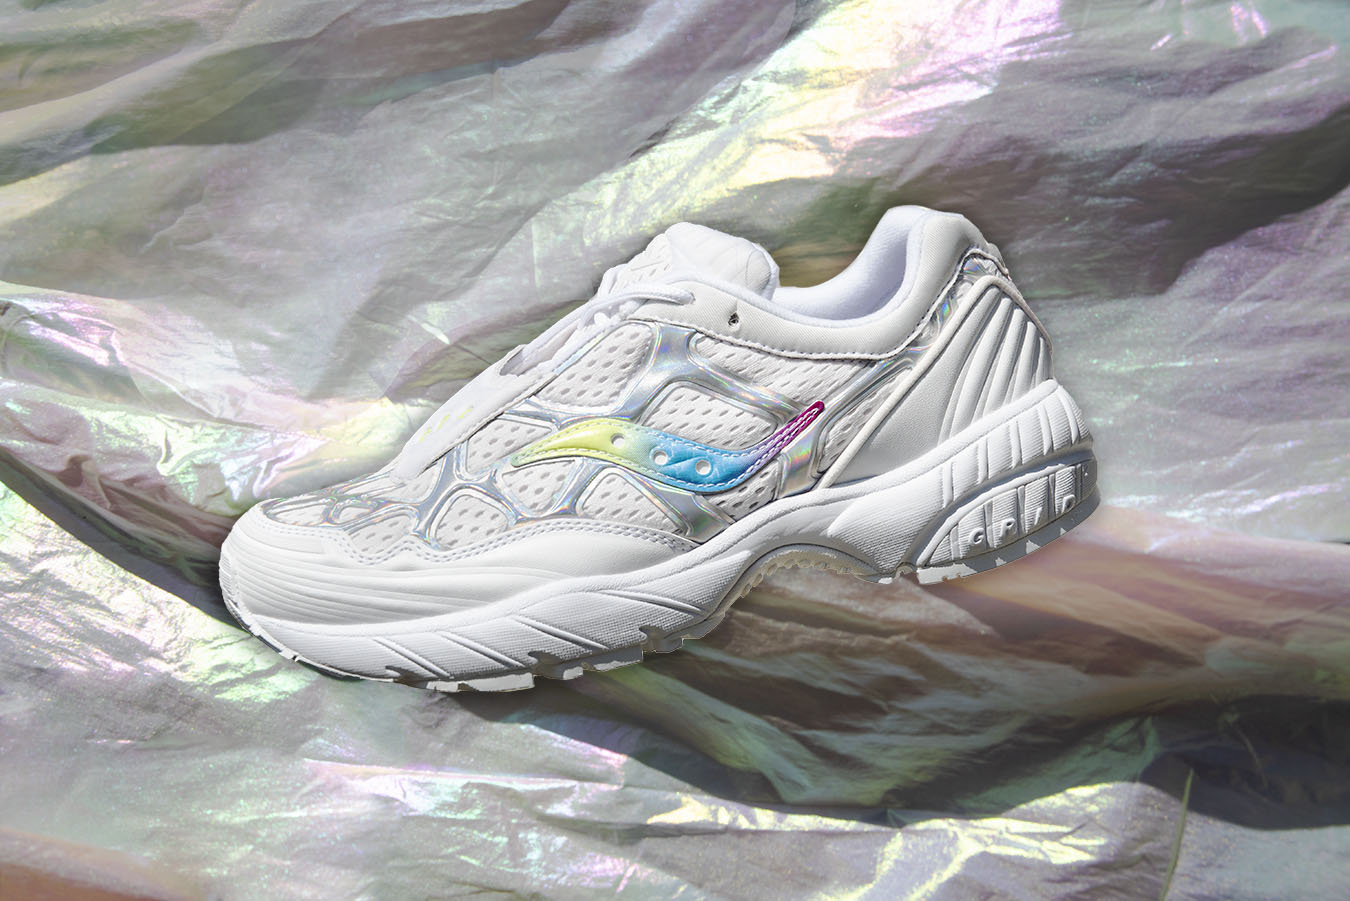 Saucony’s Grid Web Gets Summer-Ready in “White/Iridescent”